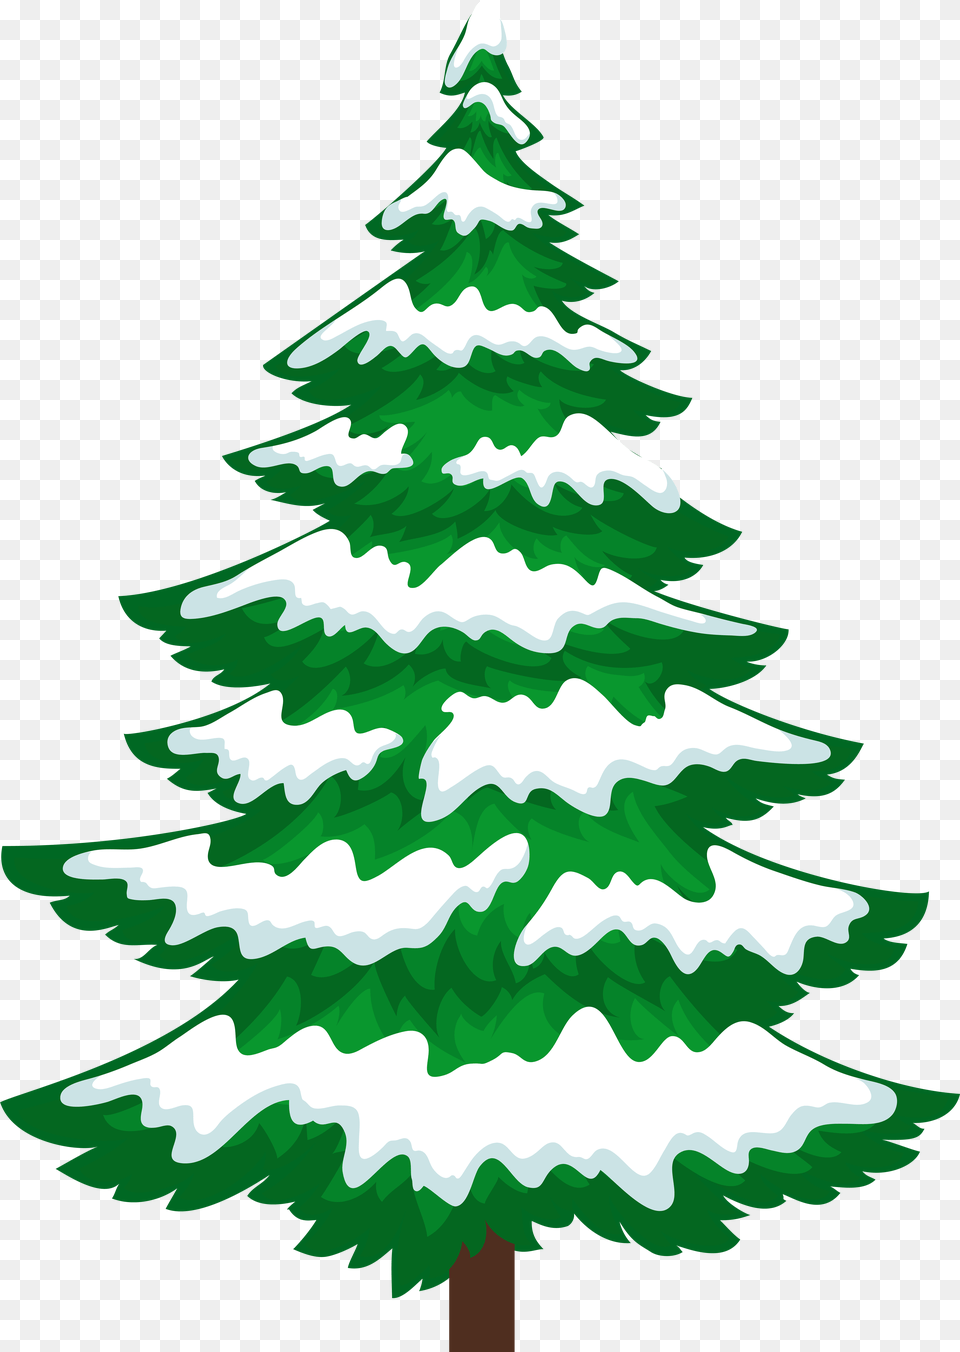 Christmas Tree Snow Clipart Snowy Christmas Tree Clipart, Plant, Pine, Fir, Christmas Decorations Png Image